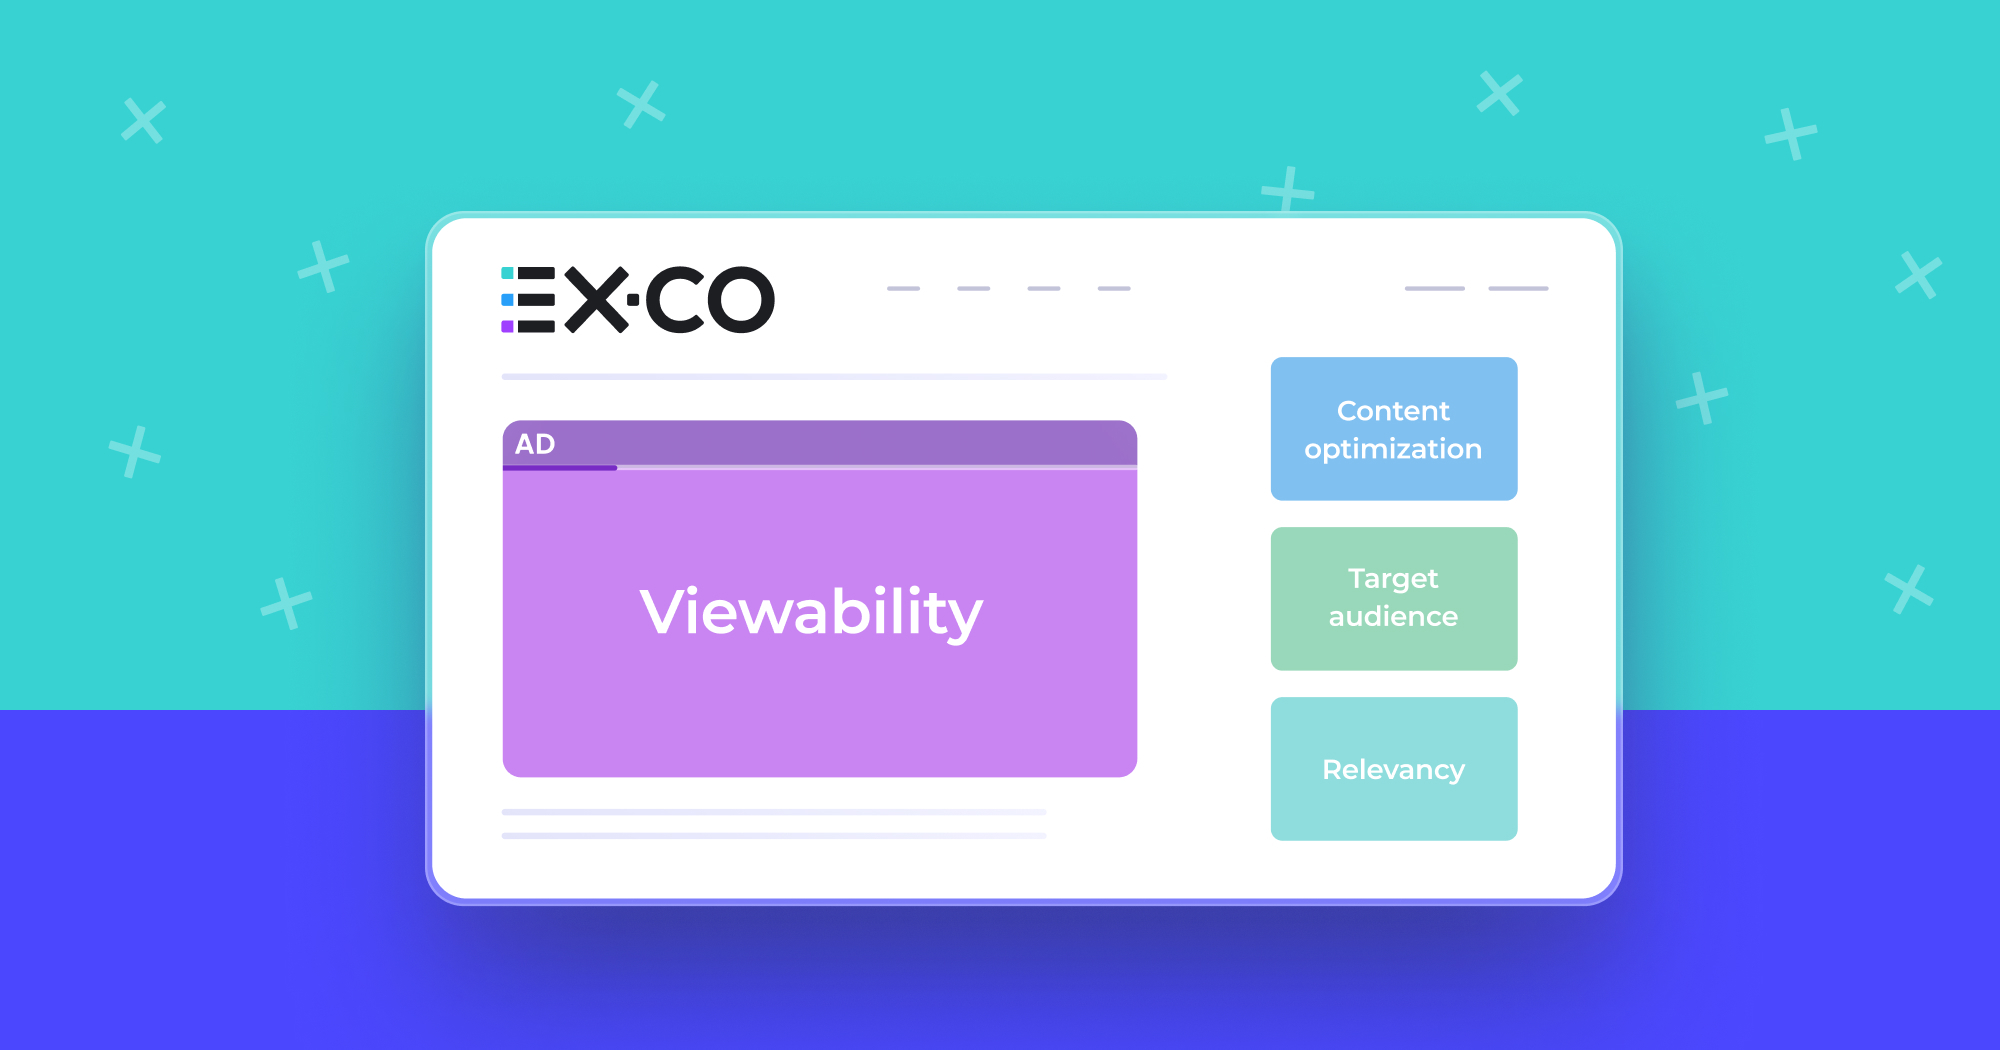 EX.CO webpage with ads for viewability, content optimization, target audience, and relevancy